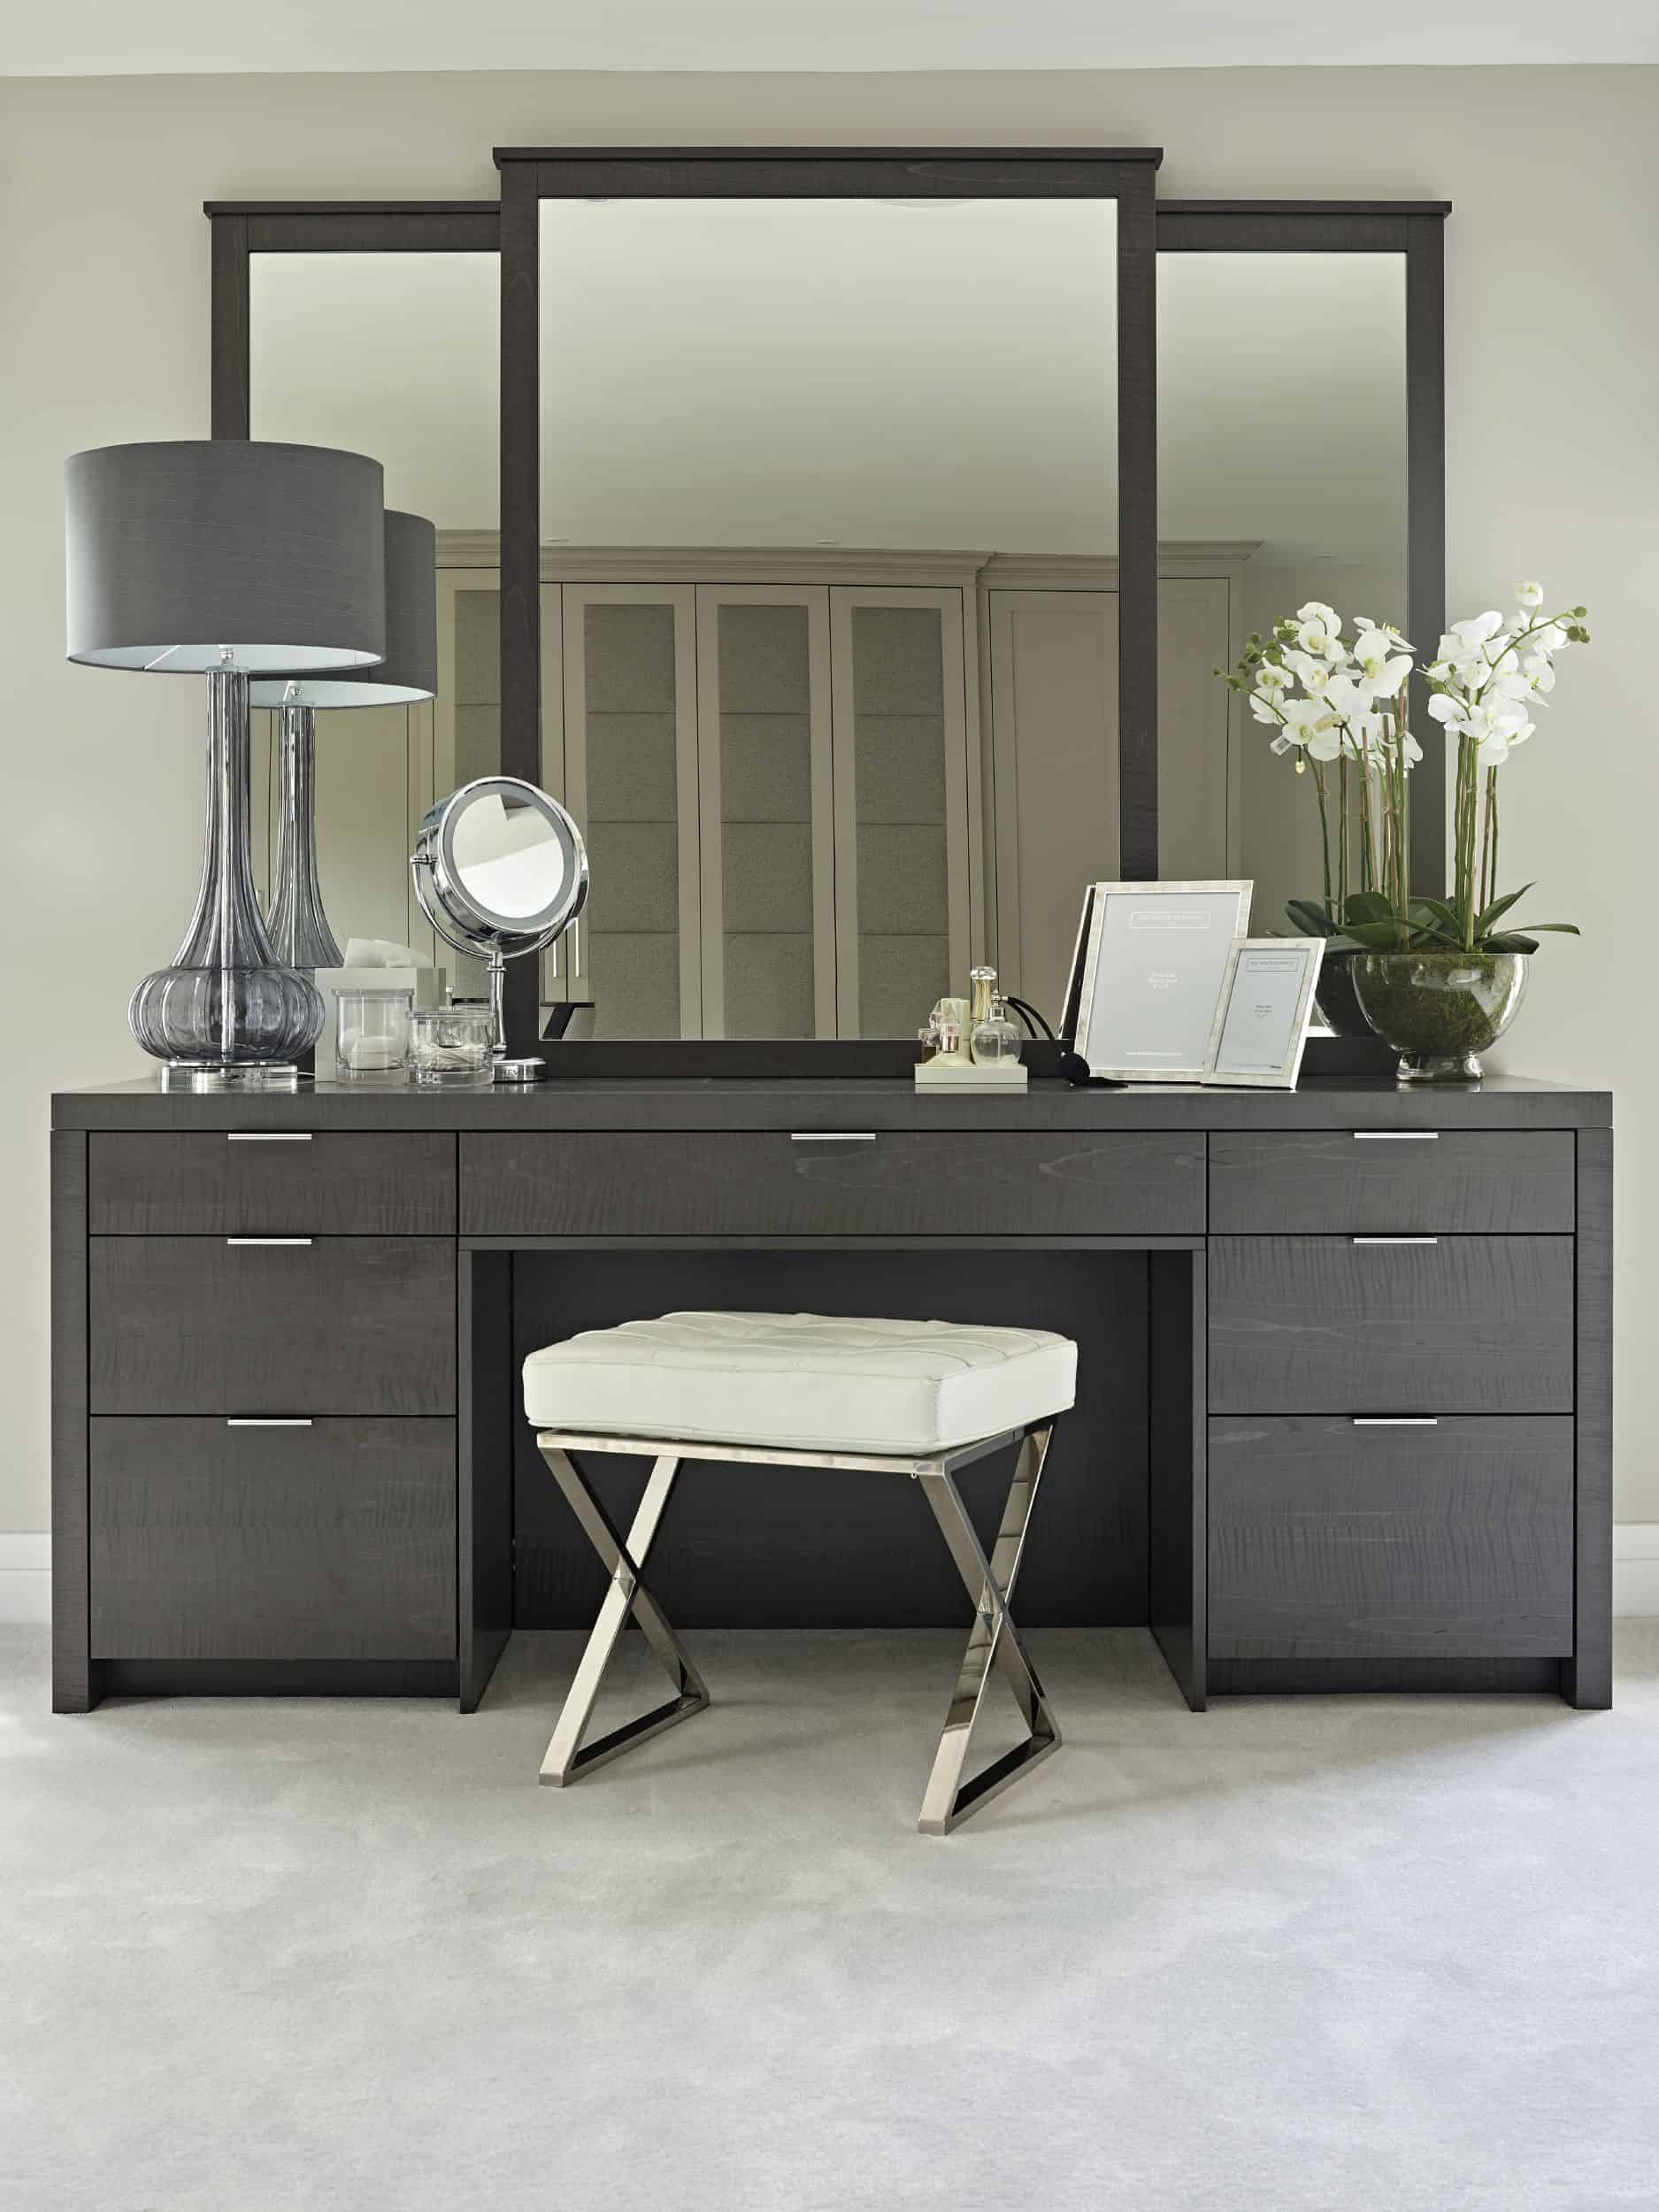 A sturdy black-colored dresser with a huge 3-fold mirror, lots of storage space, and a matching stool, in a white room.